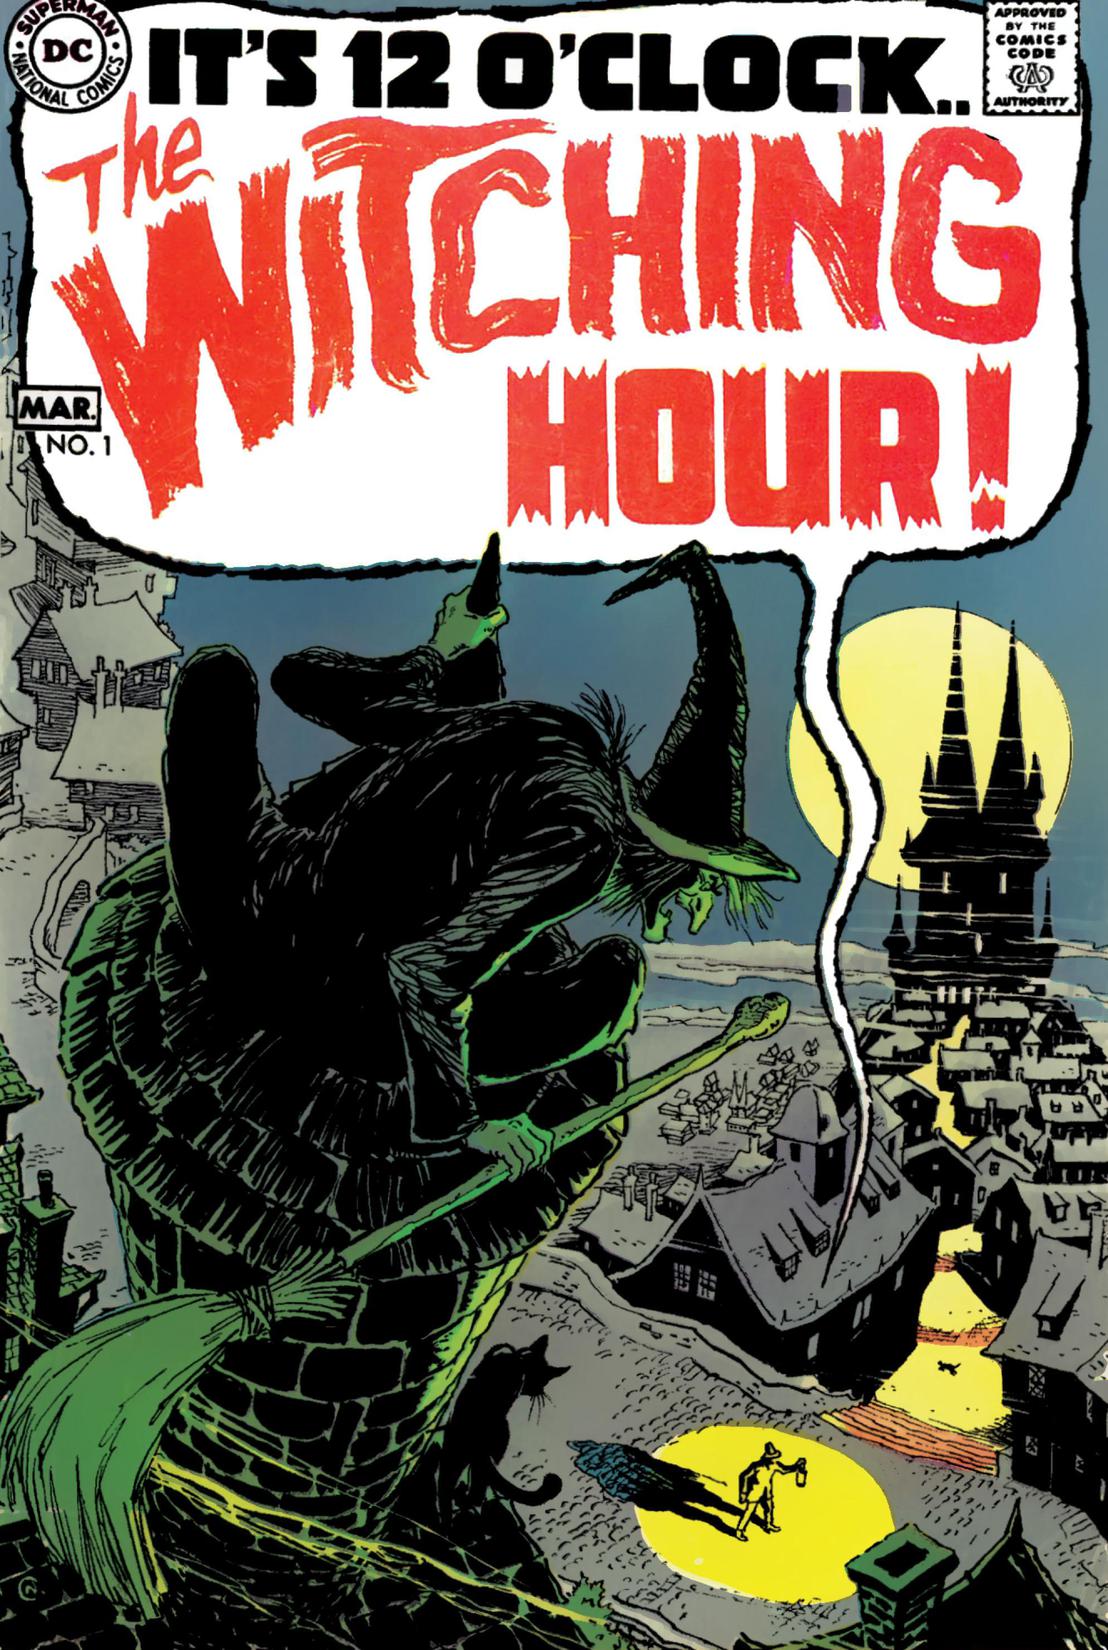 The Witching Hour #1 preview images